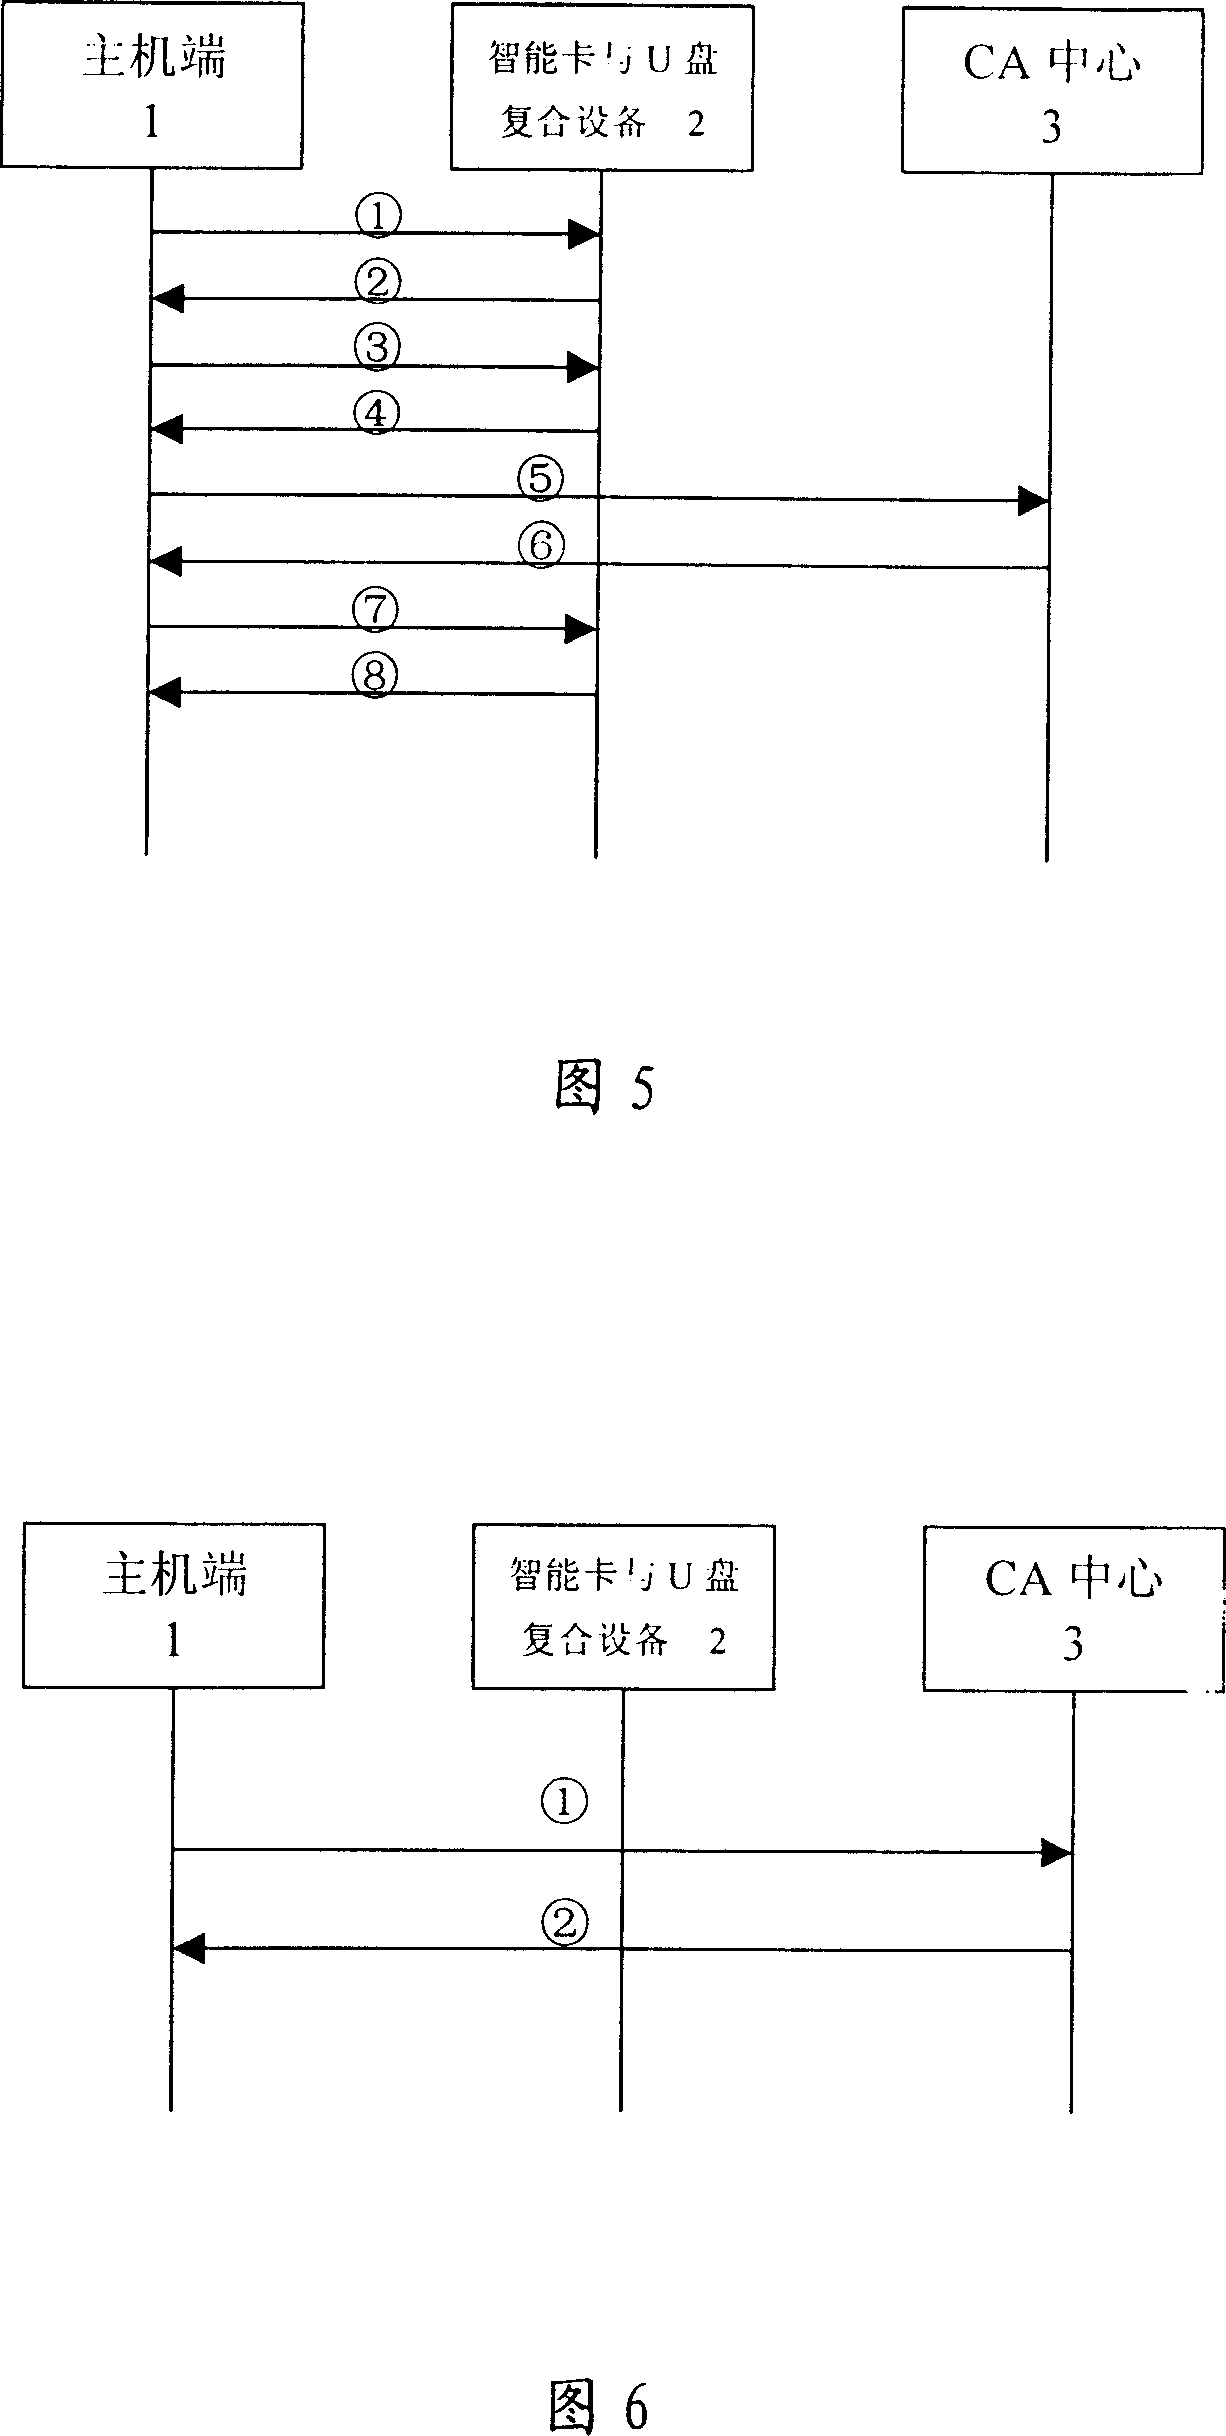 Intelligent card and U disk compound device and its access security improvement method based on bidirectional authentication mechanism